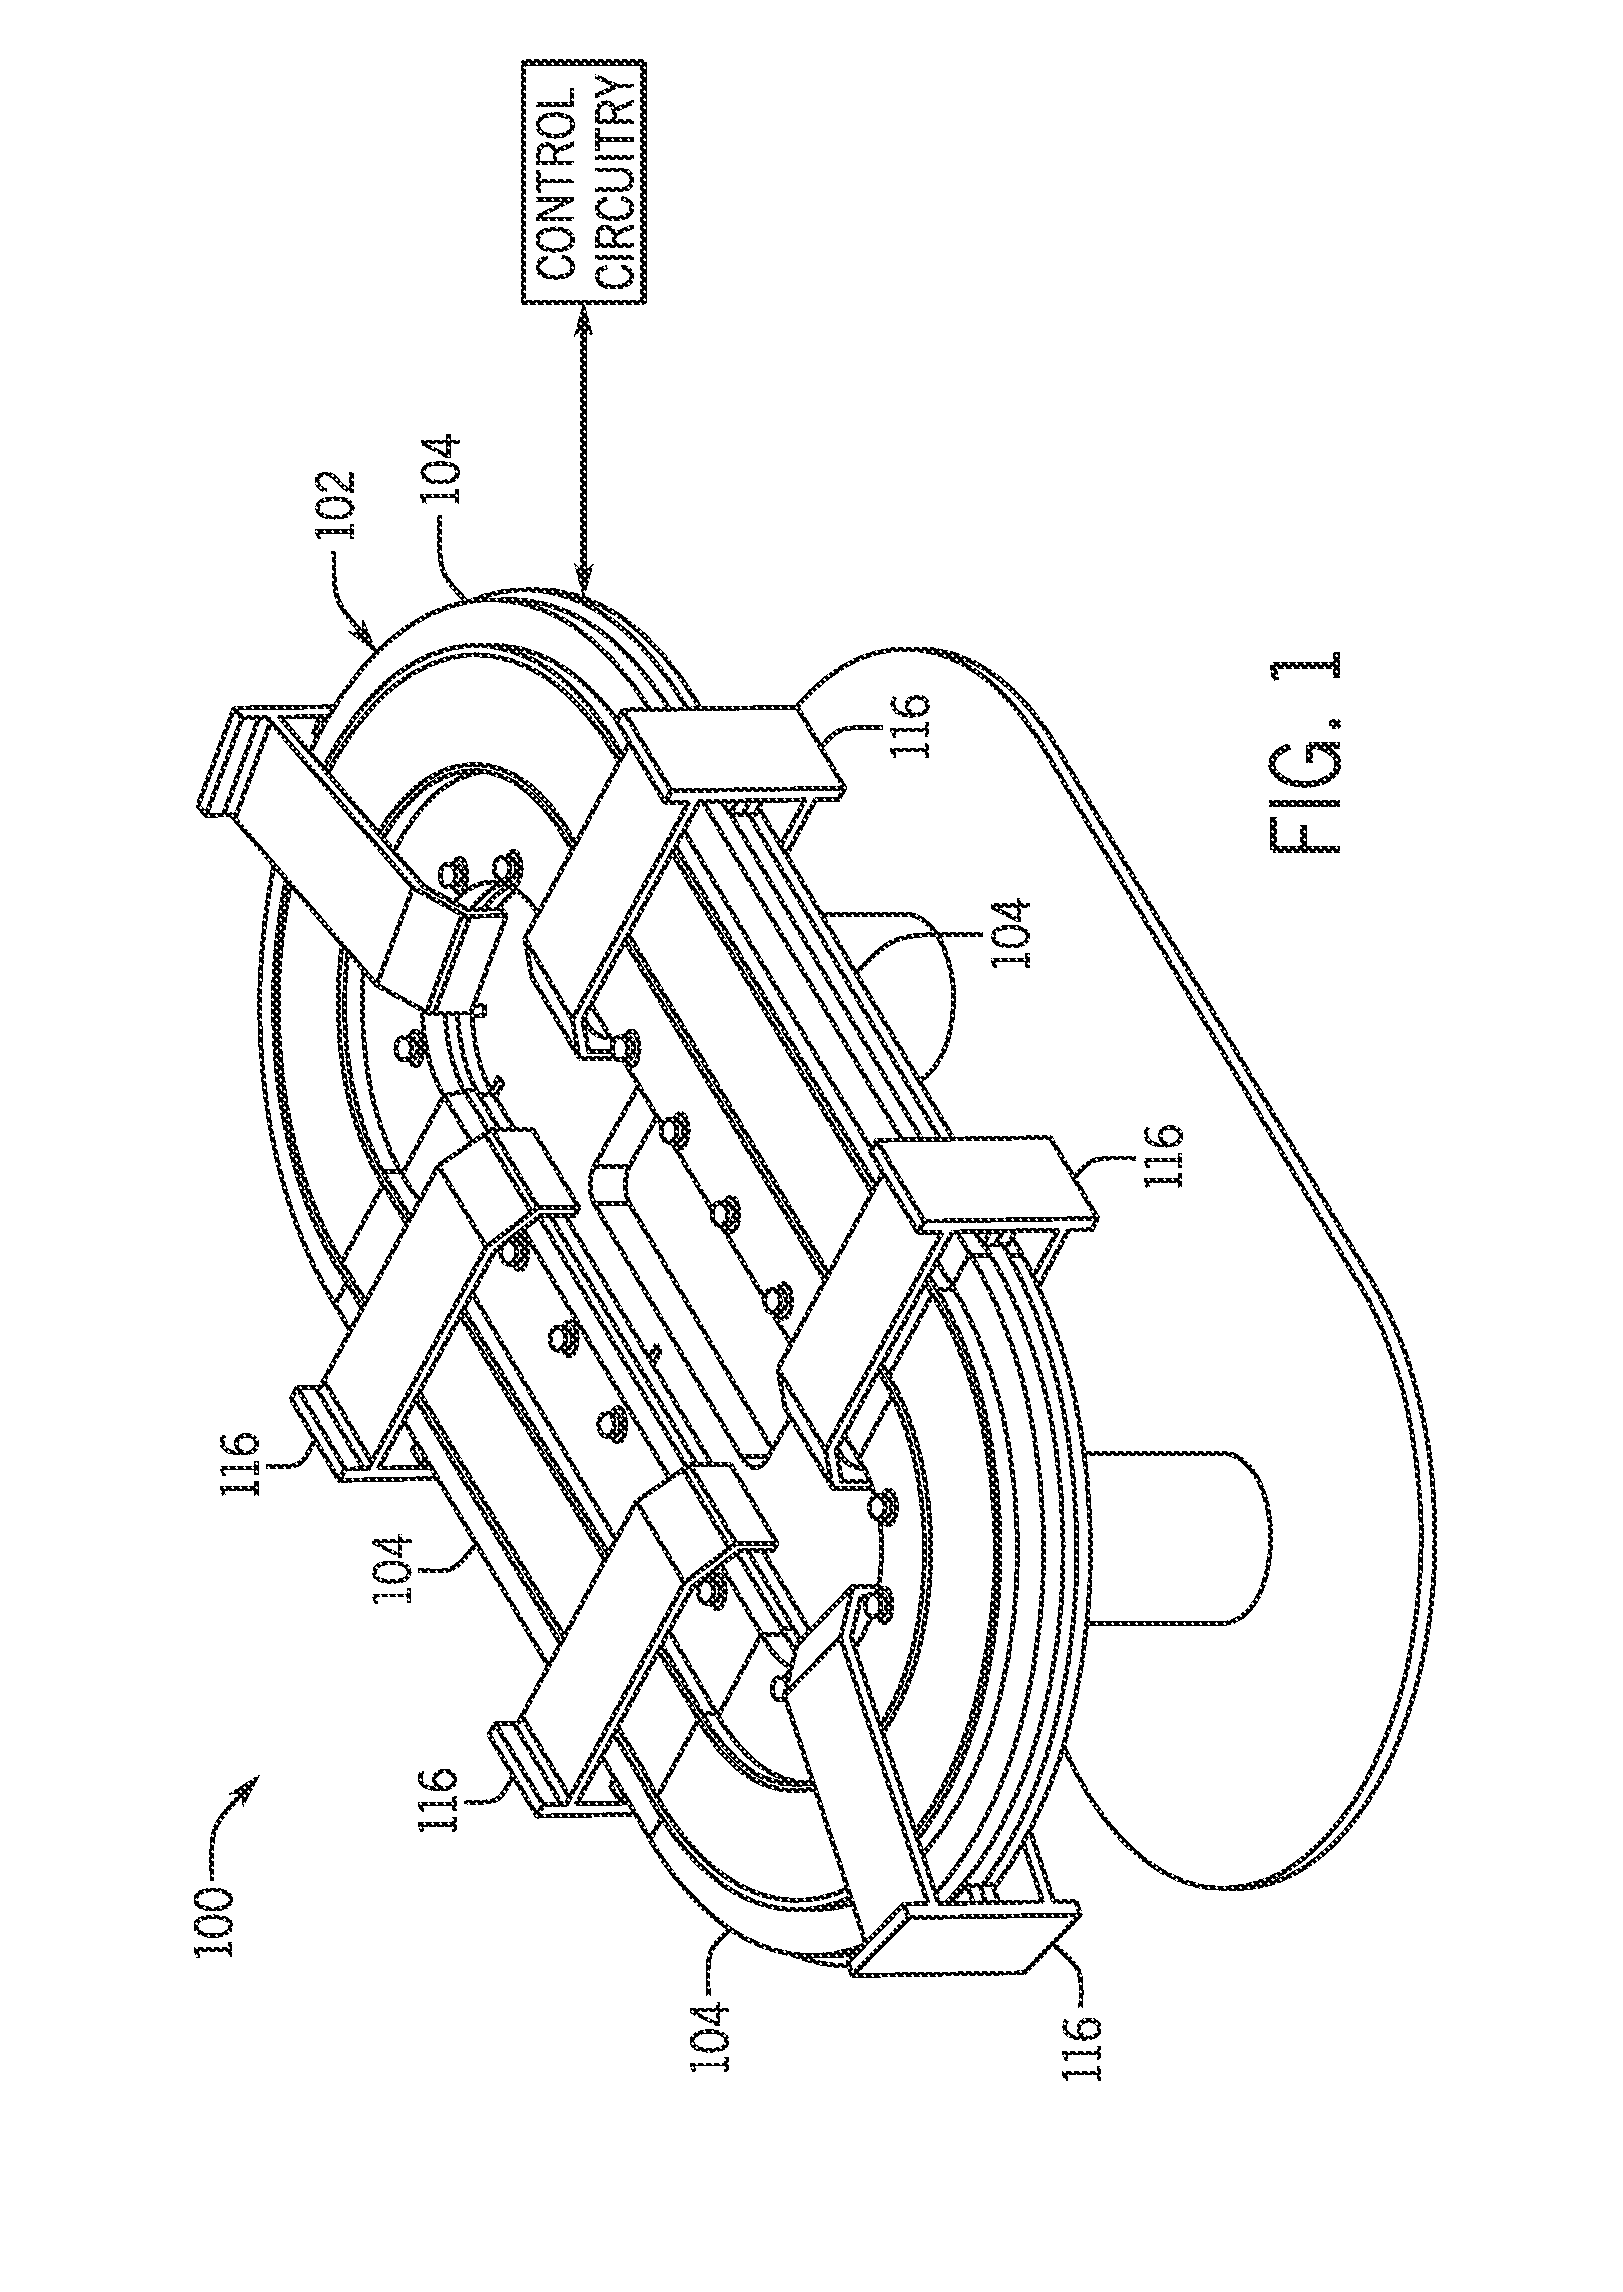 Controlled motion system having a magnetic flux bridge joining linear motor sections